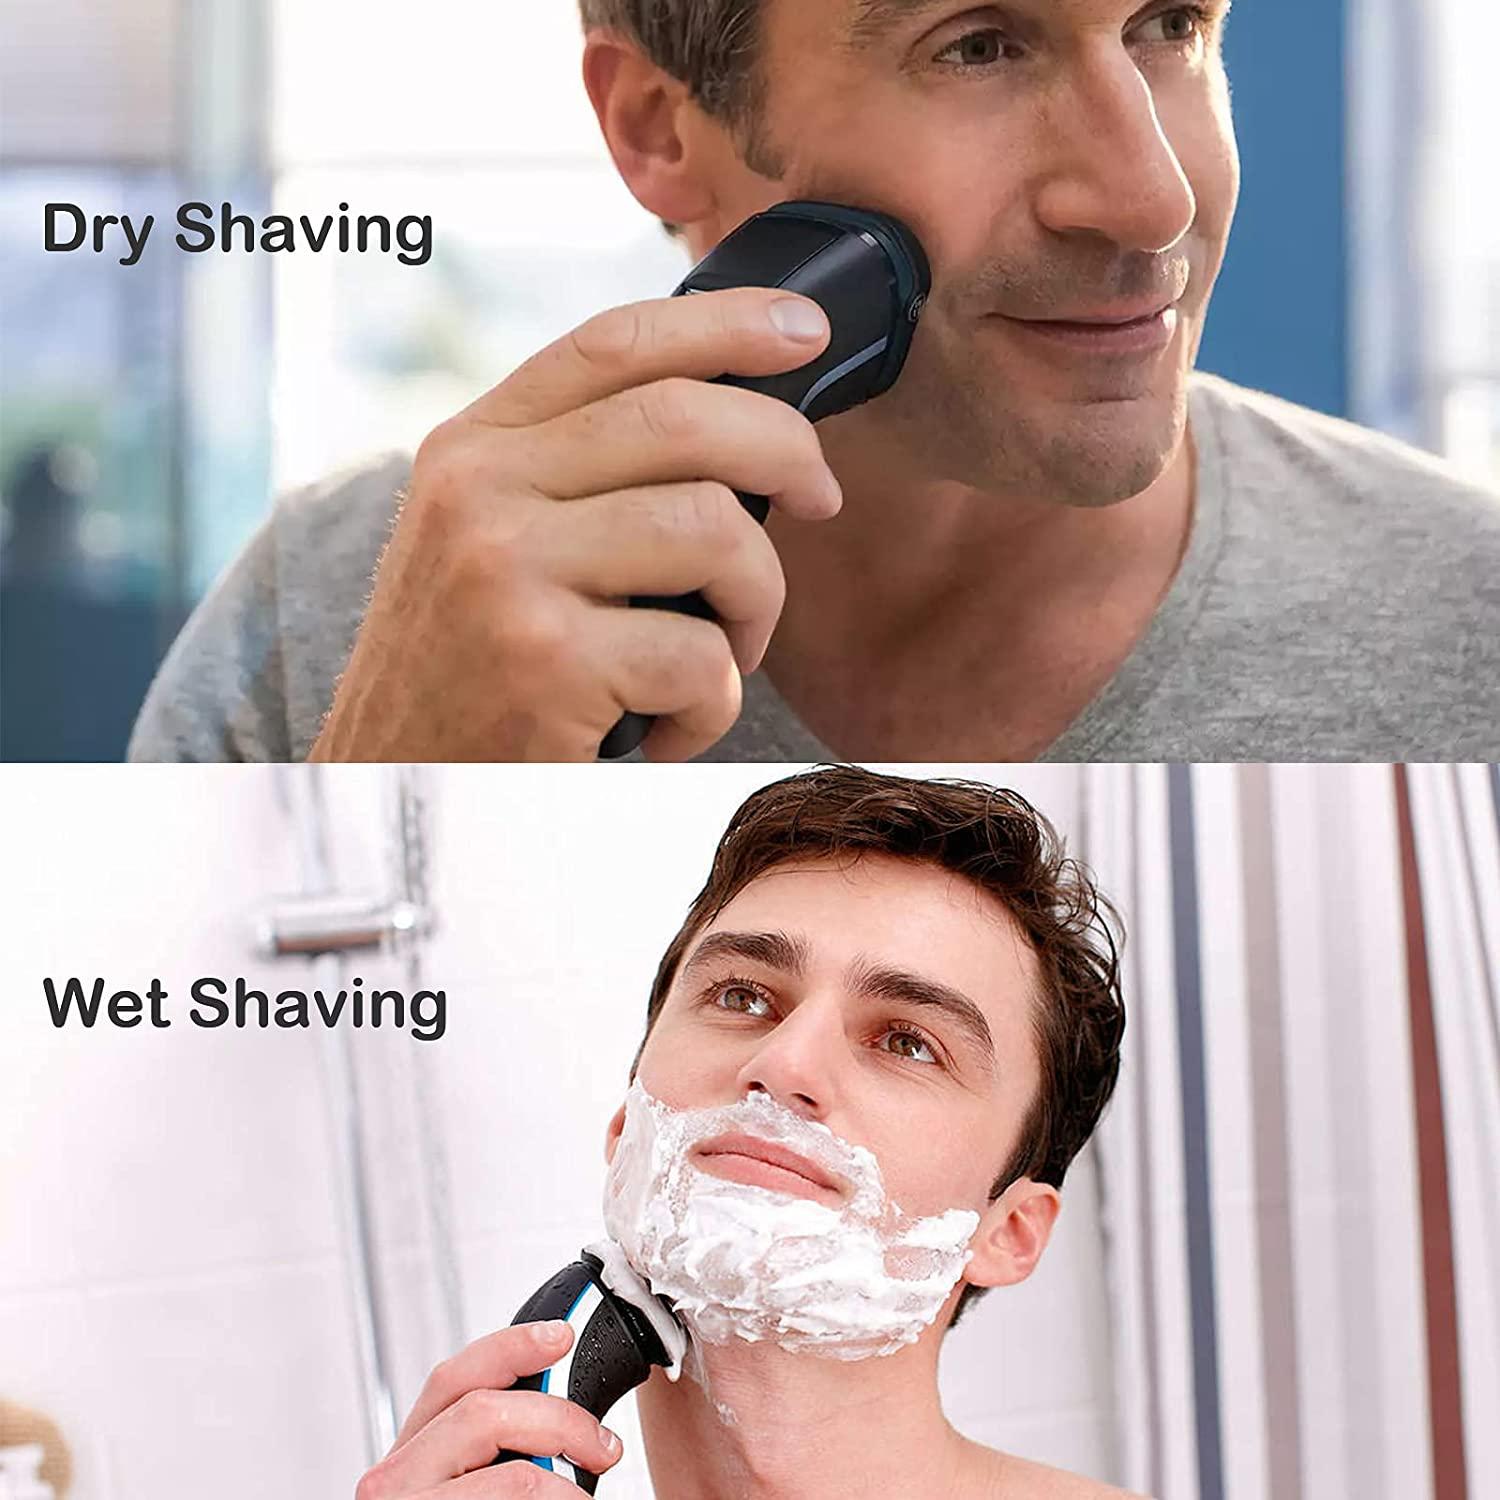 Philips Norelco Shaving Heads For Shaver Series 3000, 2000, 1000 and Click  & Style, SH30/52